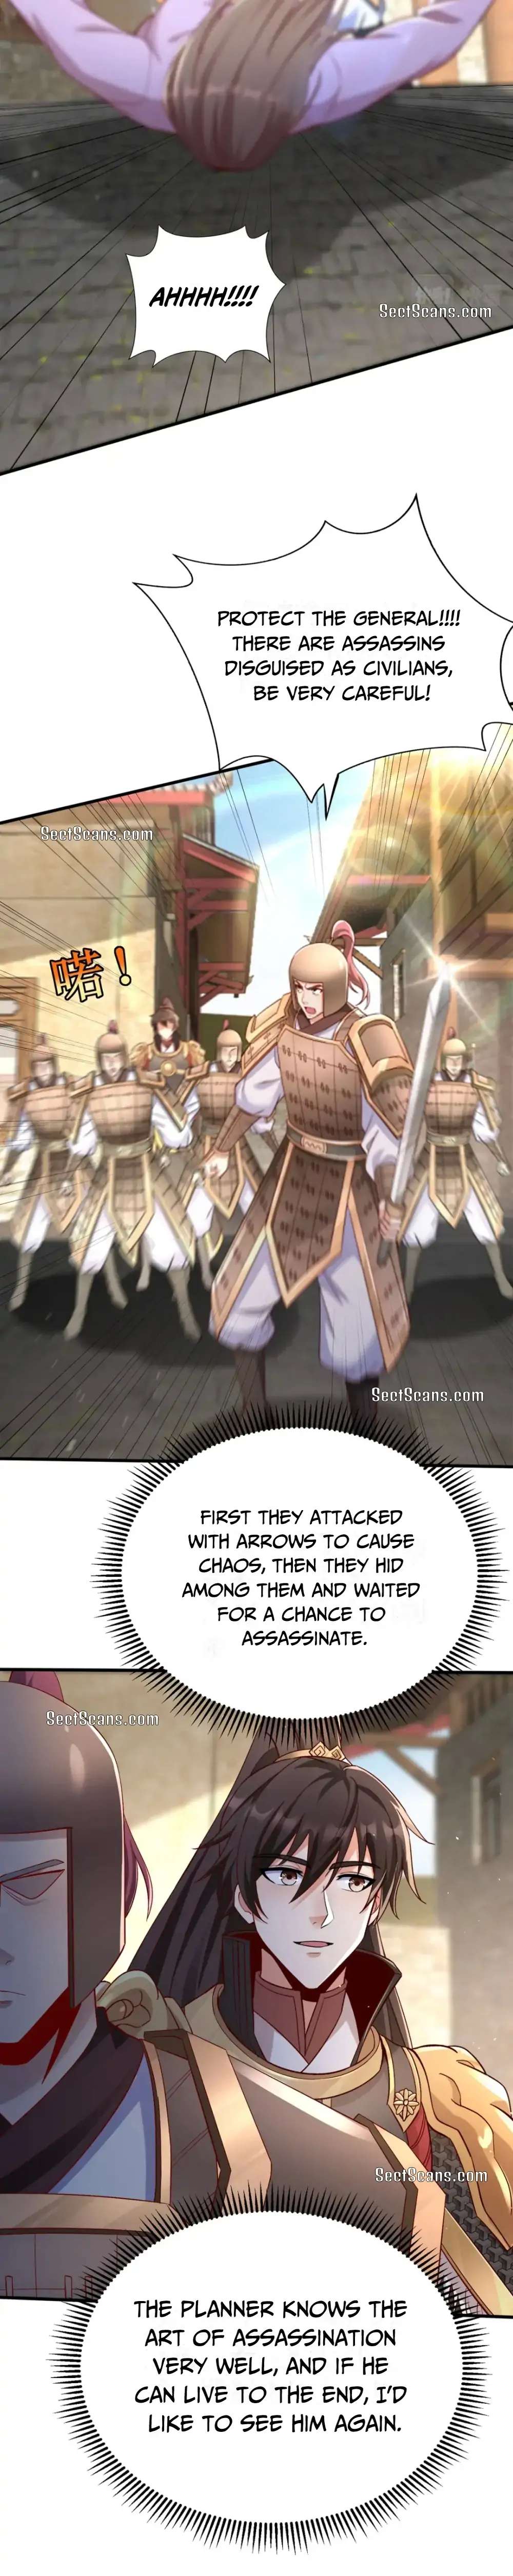 The Son Of The First Emperor Kills Enemies And Becomes A God - Page 3